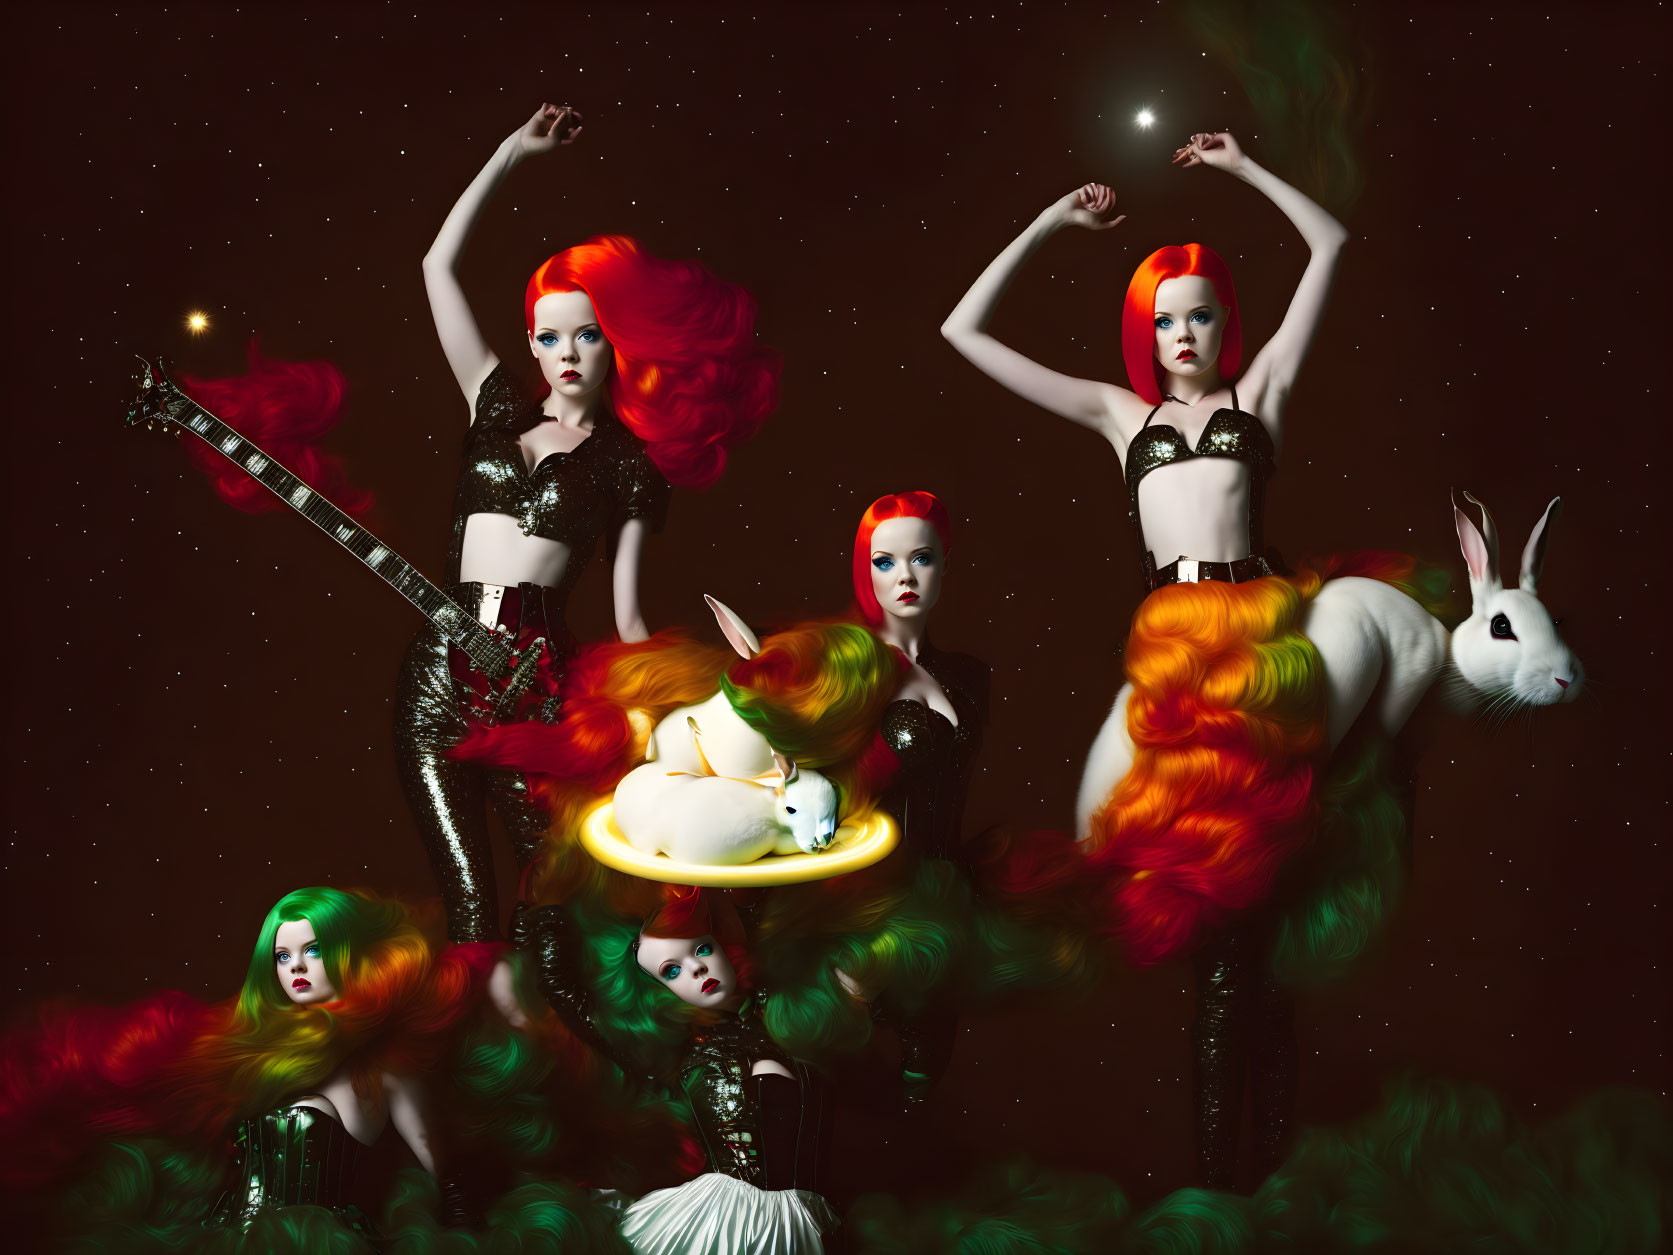 Surrealistic image: Four women with red and green hair posing with white rabbit against starry